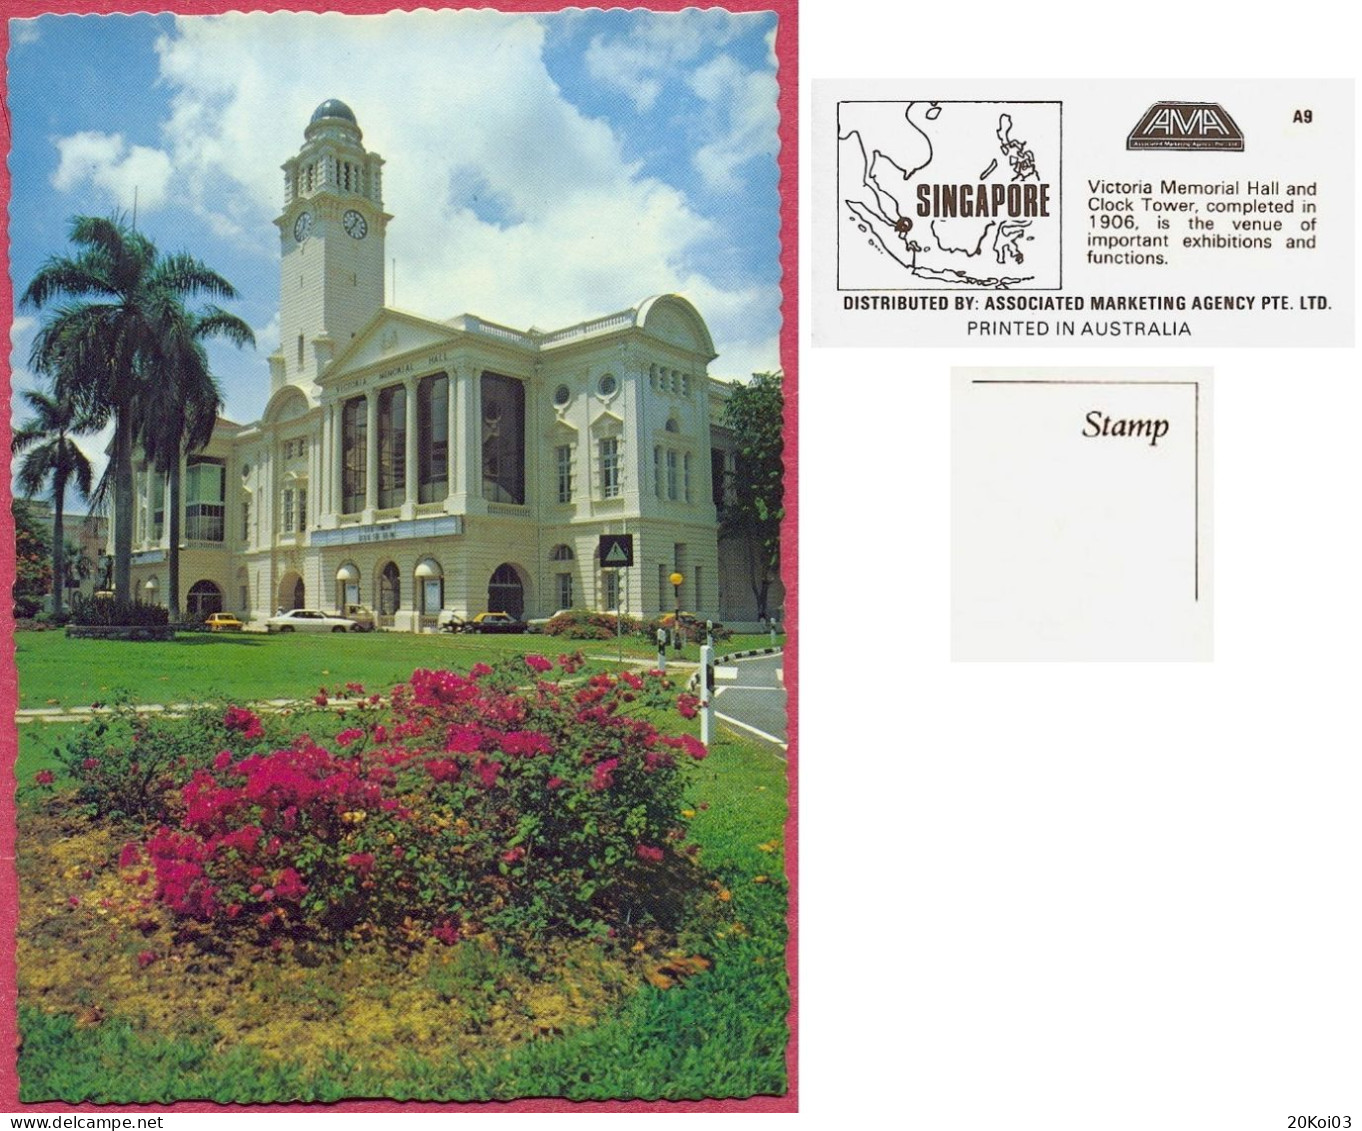 Singapore Victoria Memorial Hall, And Clock Tower Completed 1906, +/-1975's A9 AMA , Vintage UNC_cpc - Singapur